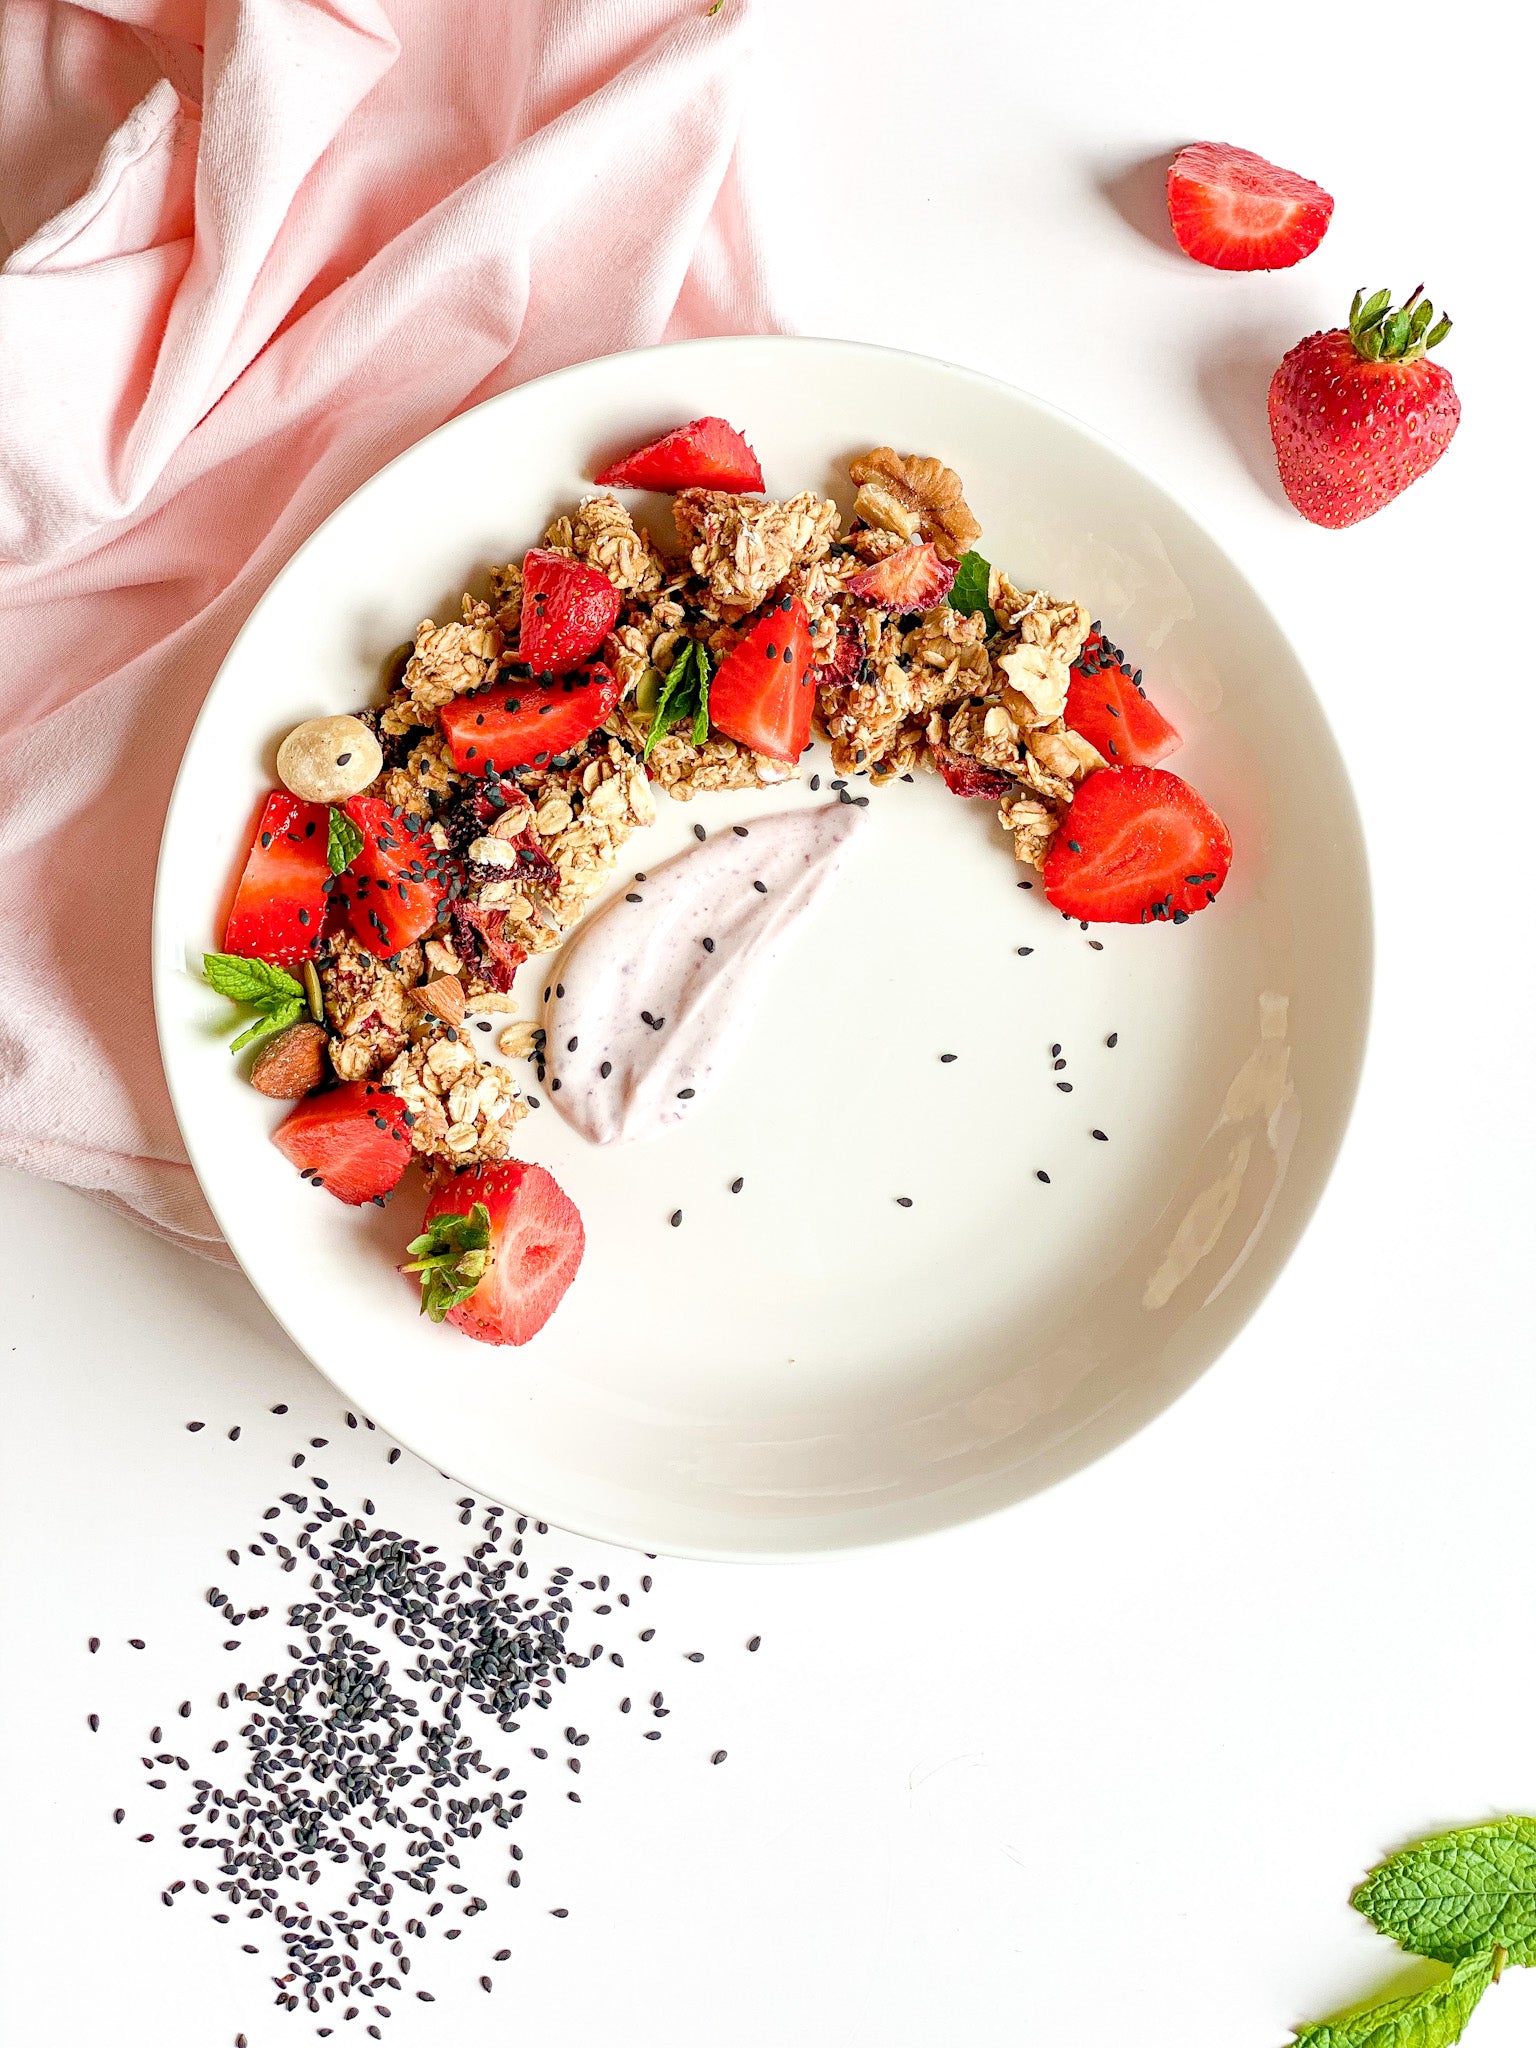 STRAWBERRY SUGAR-FREE GRANOLA WITH ADDED PROTEIN